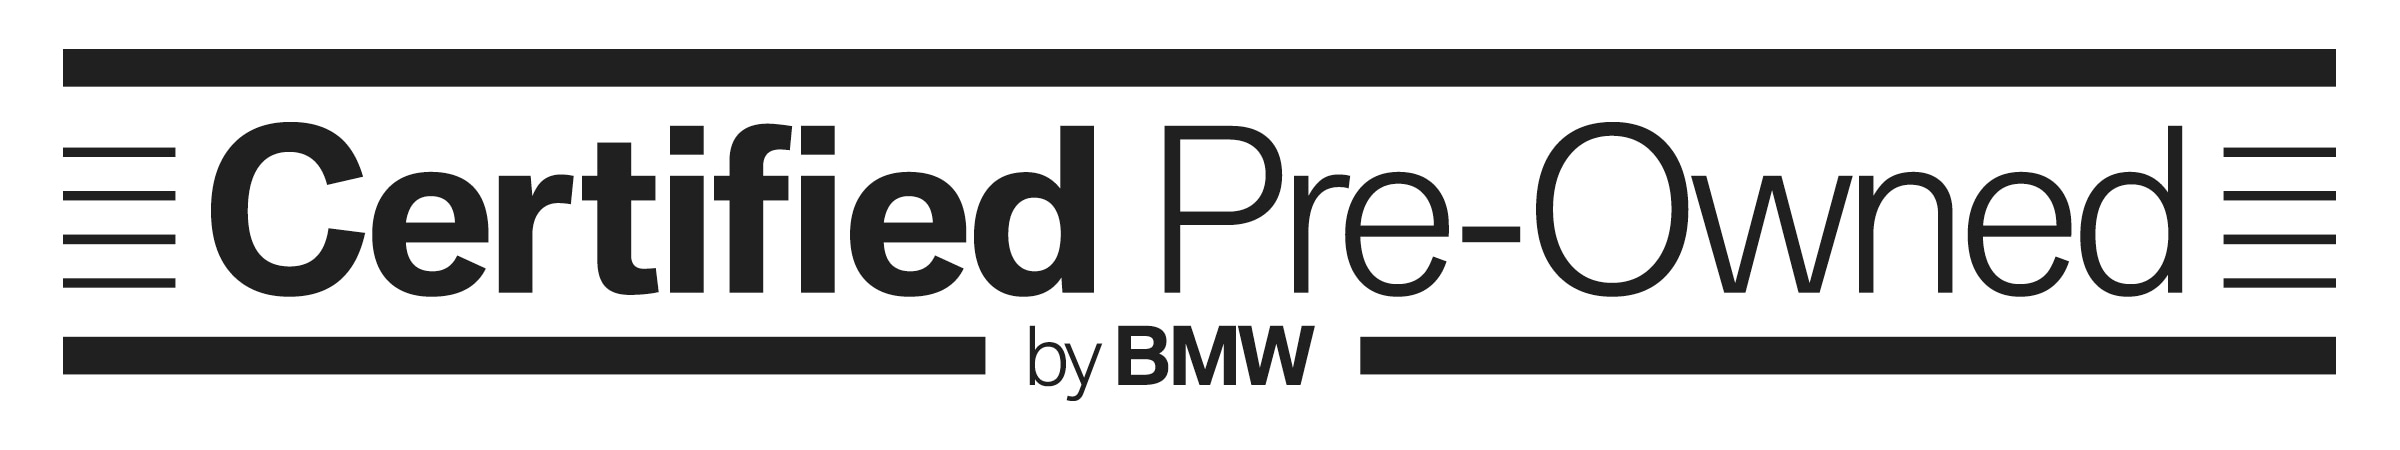 Certified pre-owned bmw financing rates #6